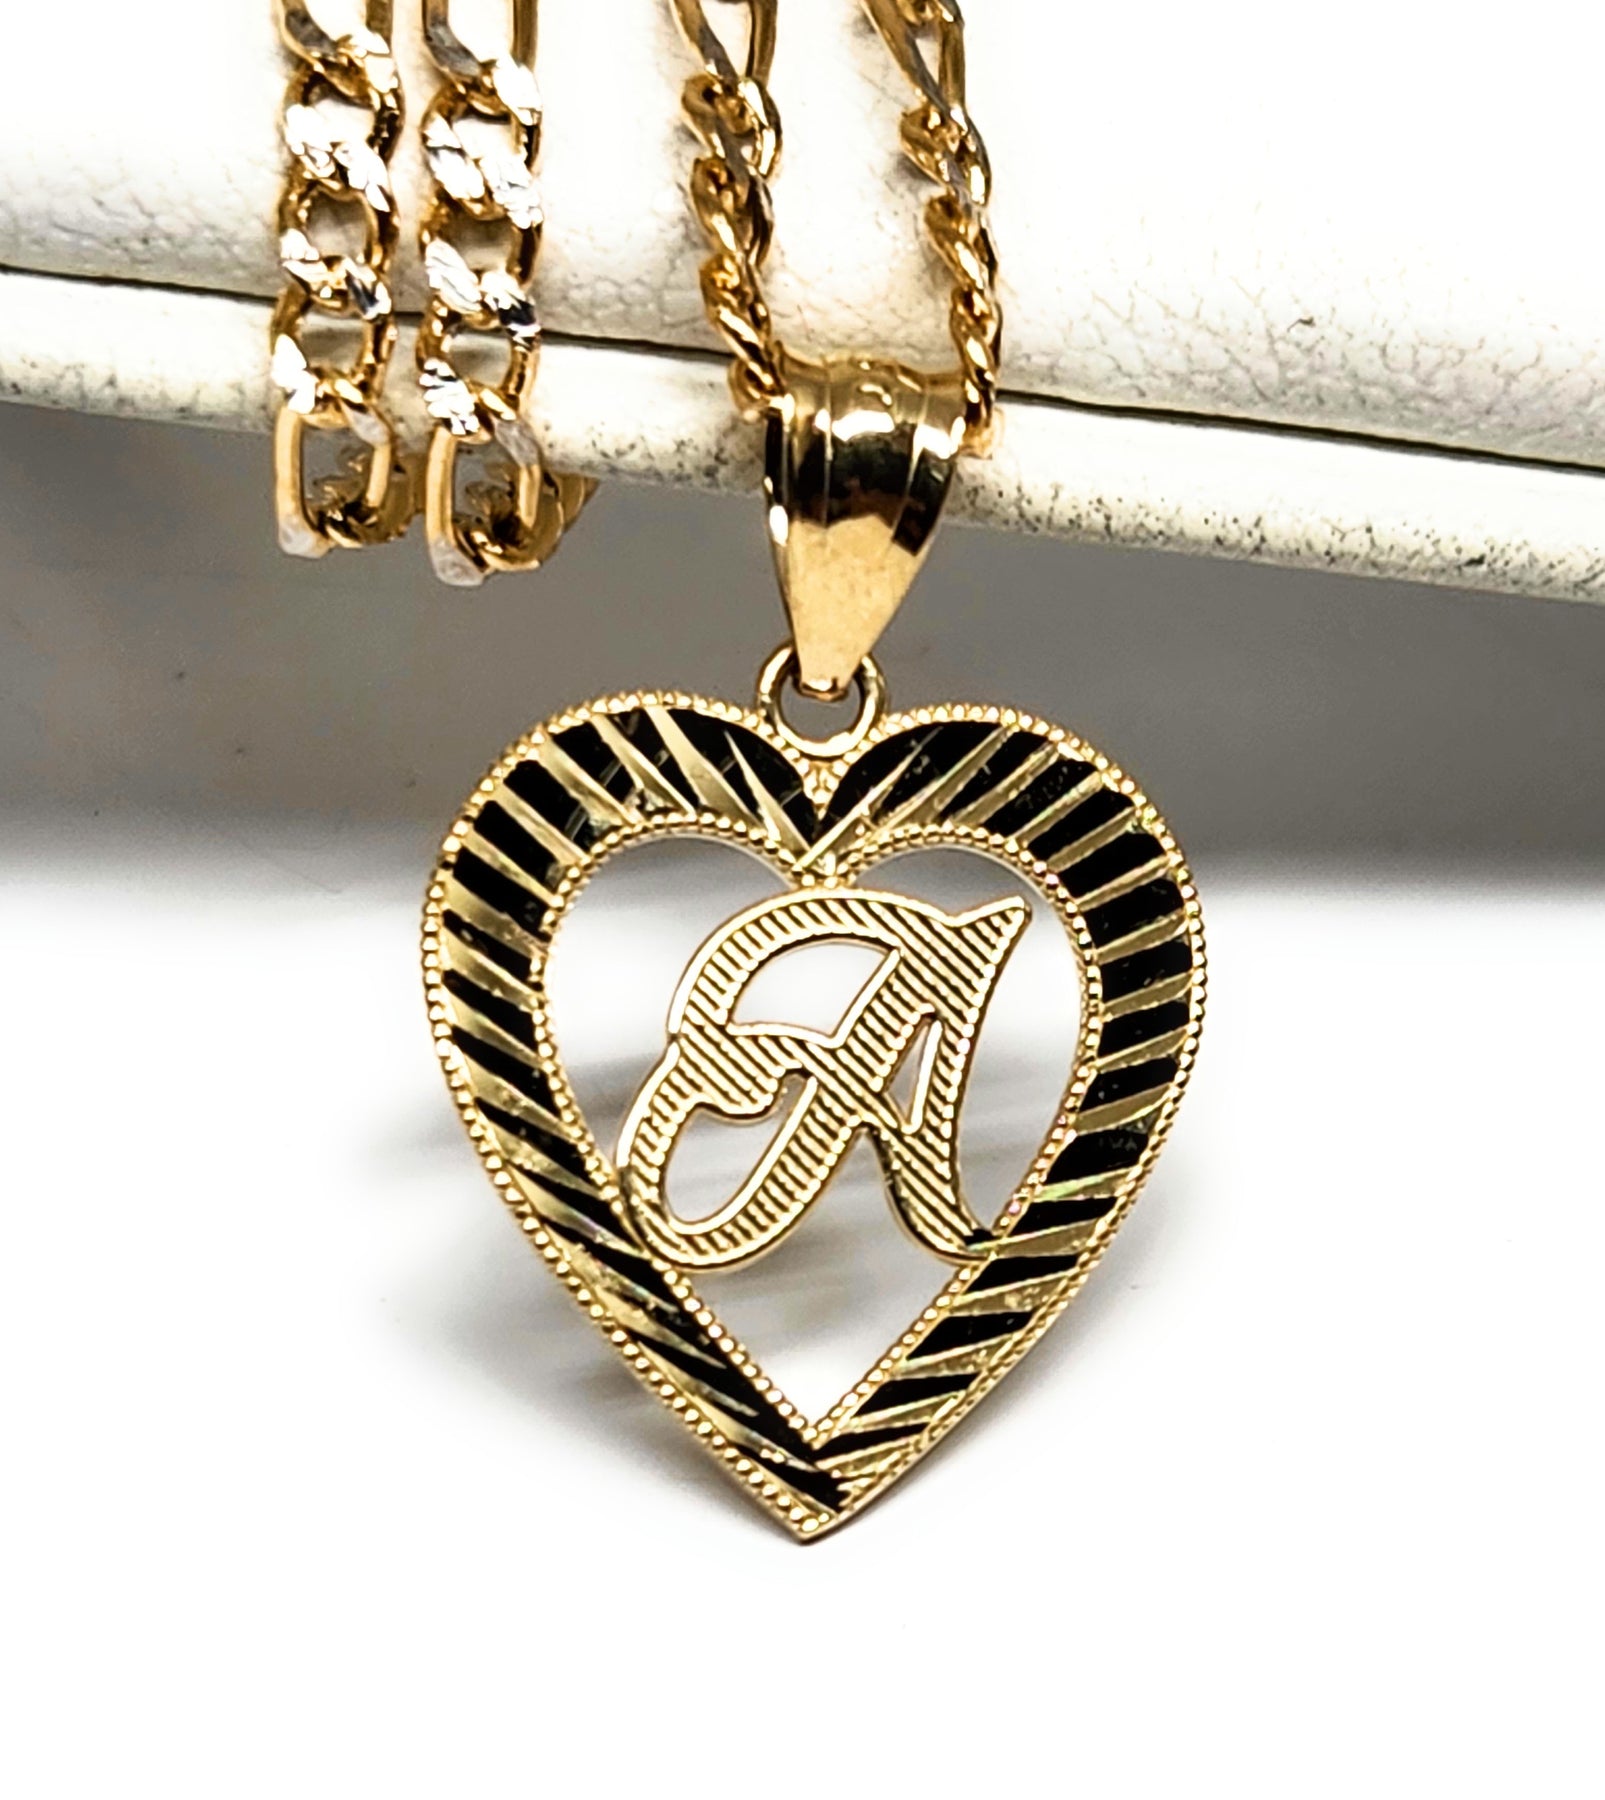 10k Solid Gold CURSIVE HEART CUSTOMIZED Initial Letter Pendant – Fran ...